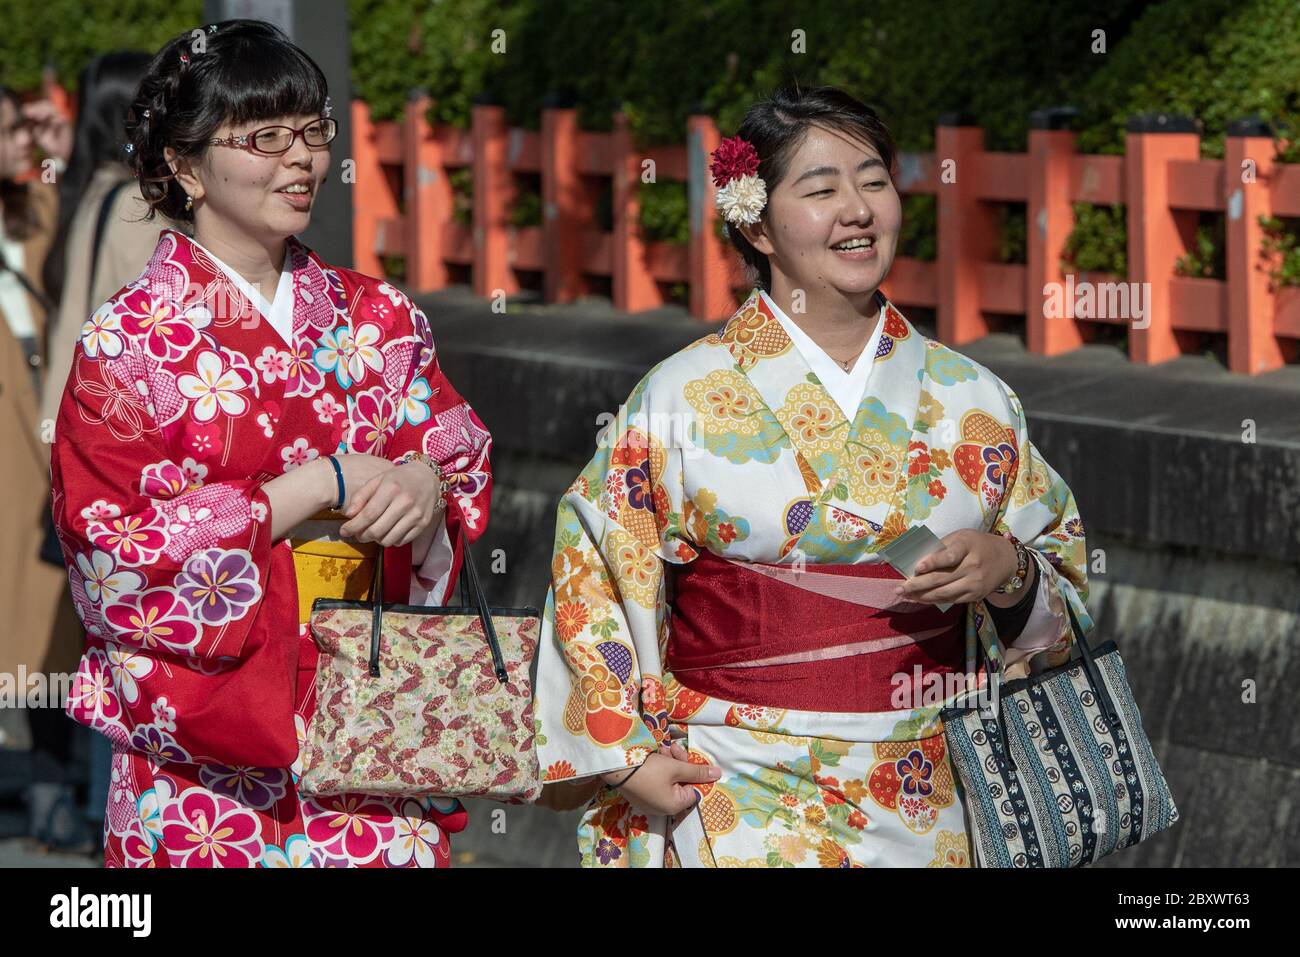 Young apprentice geishas called Maiko walking the main street in Gion district in Kyoto Japan Stock Photo